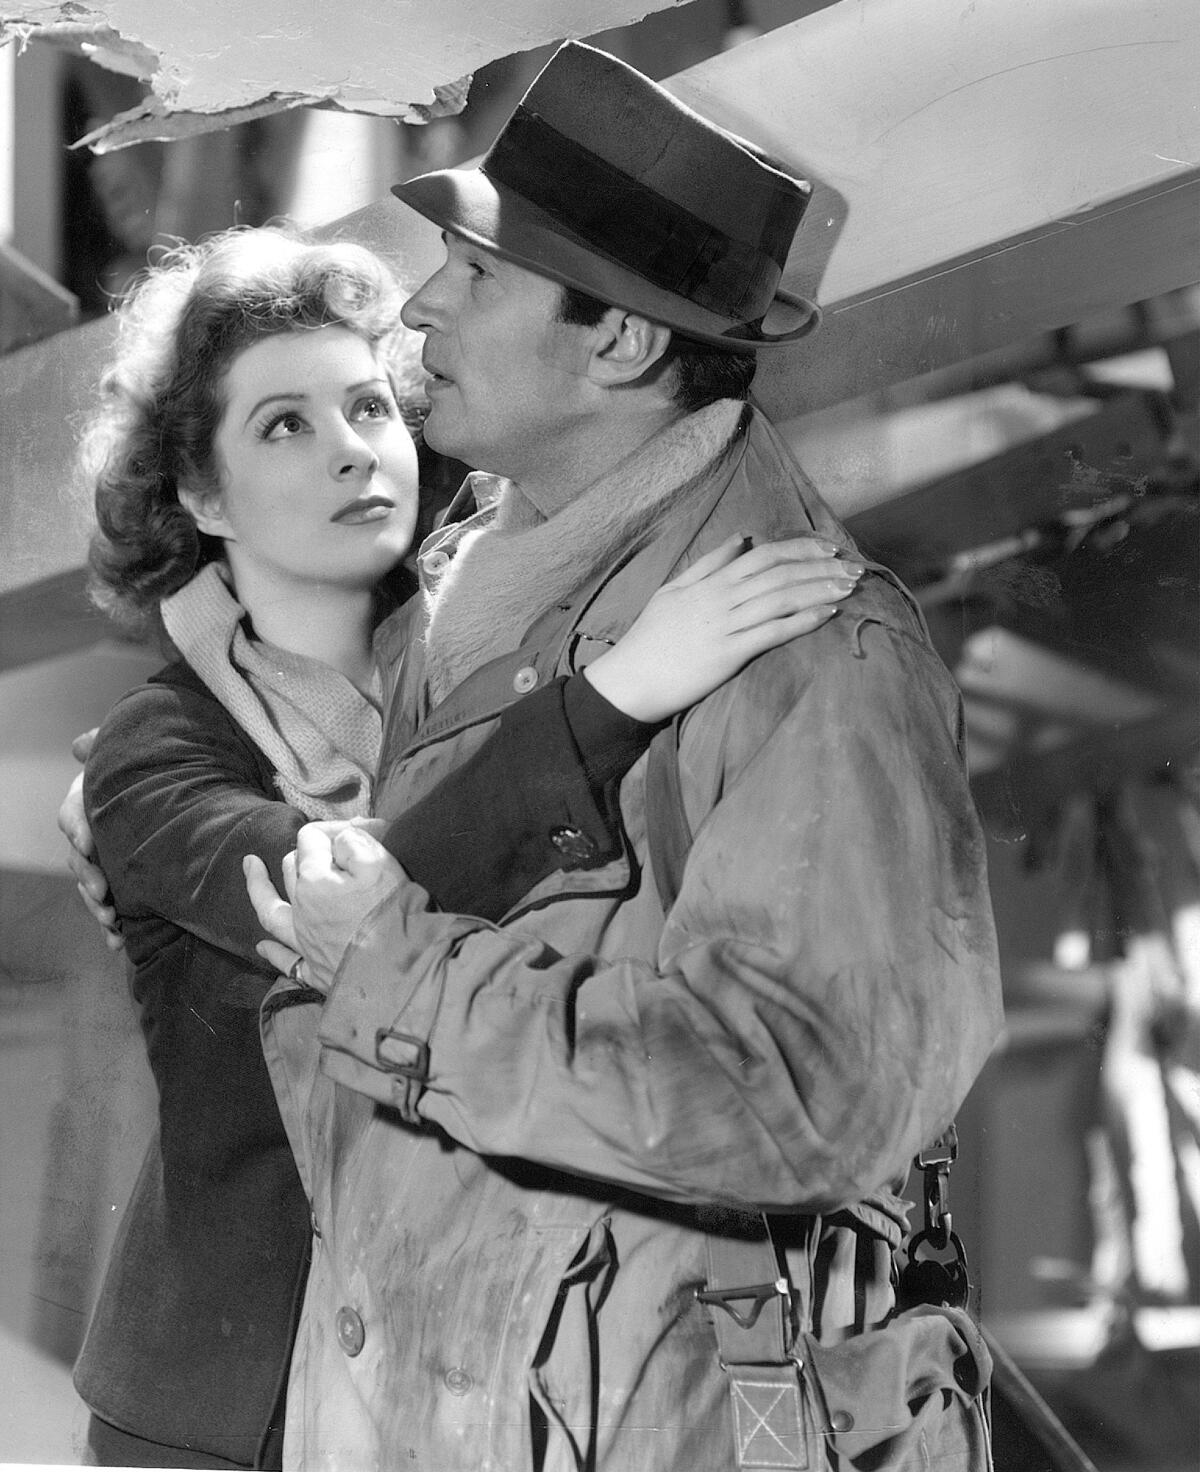 A black-and-white movie still of a woman with her arms around a man in a hat and trenchcoat, gazing up at him.